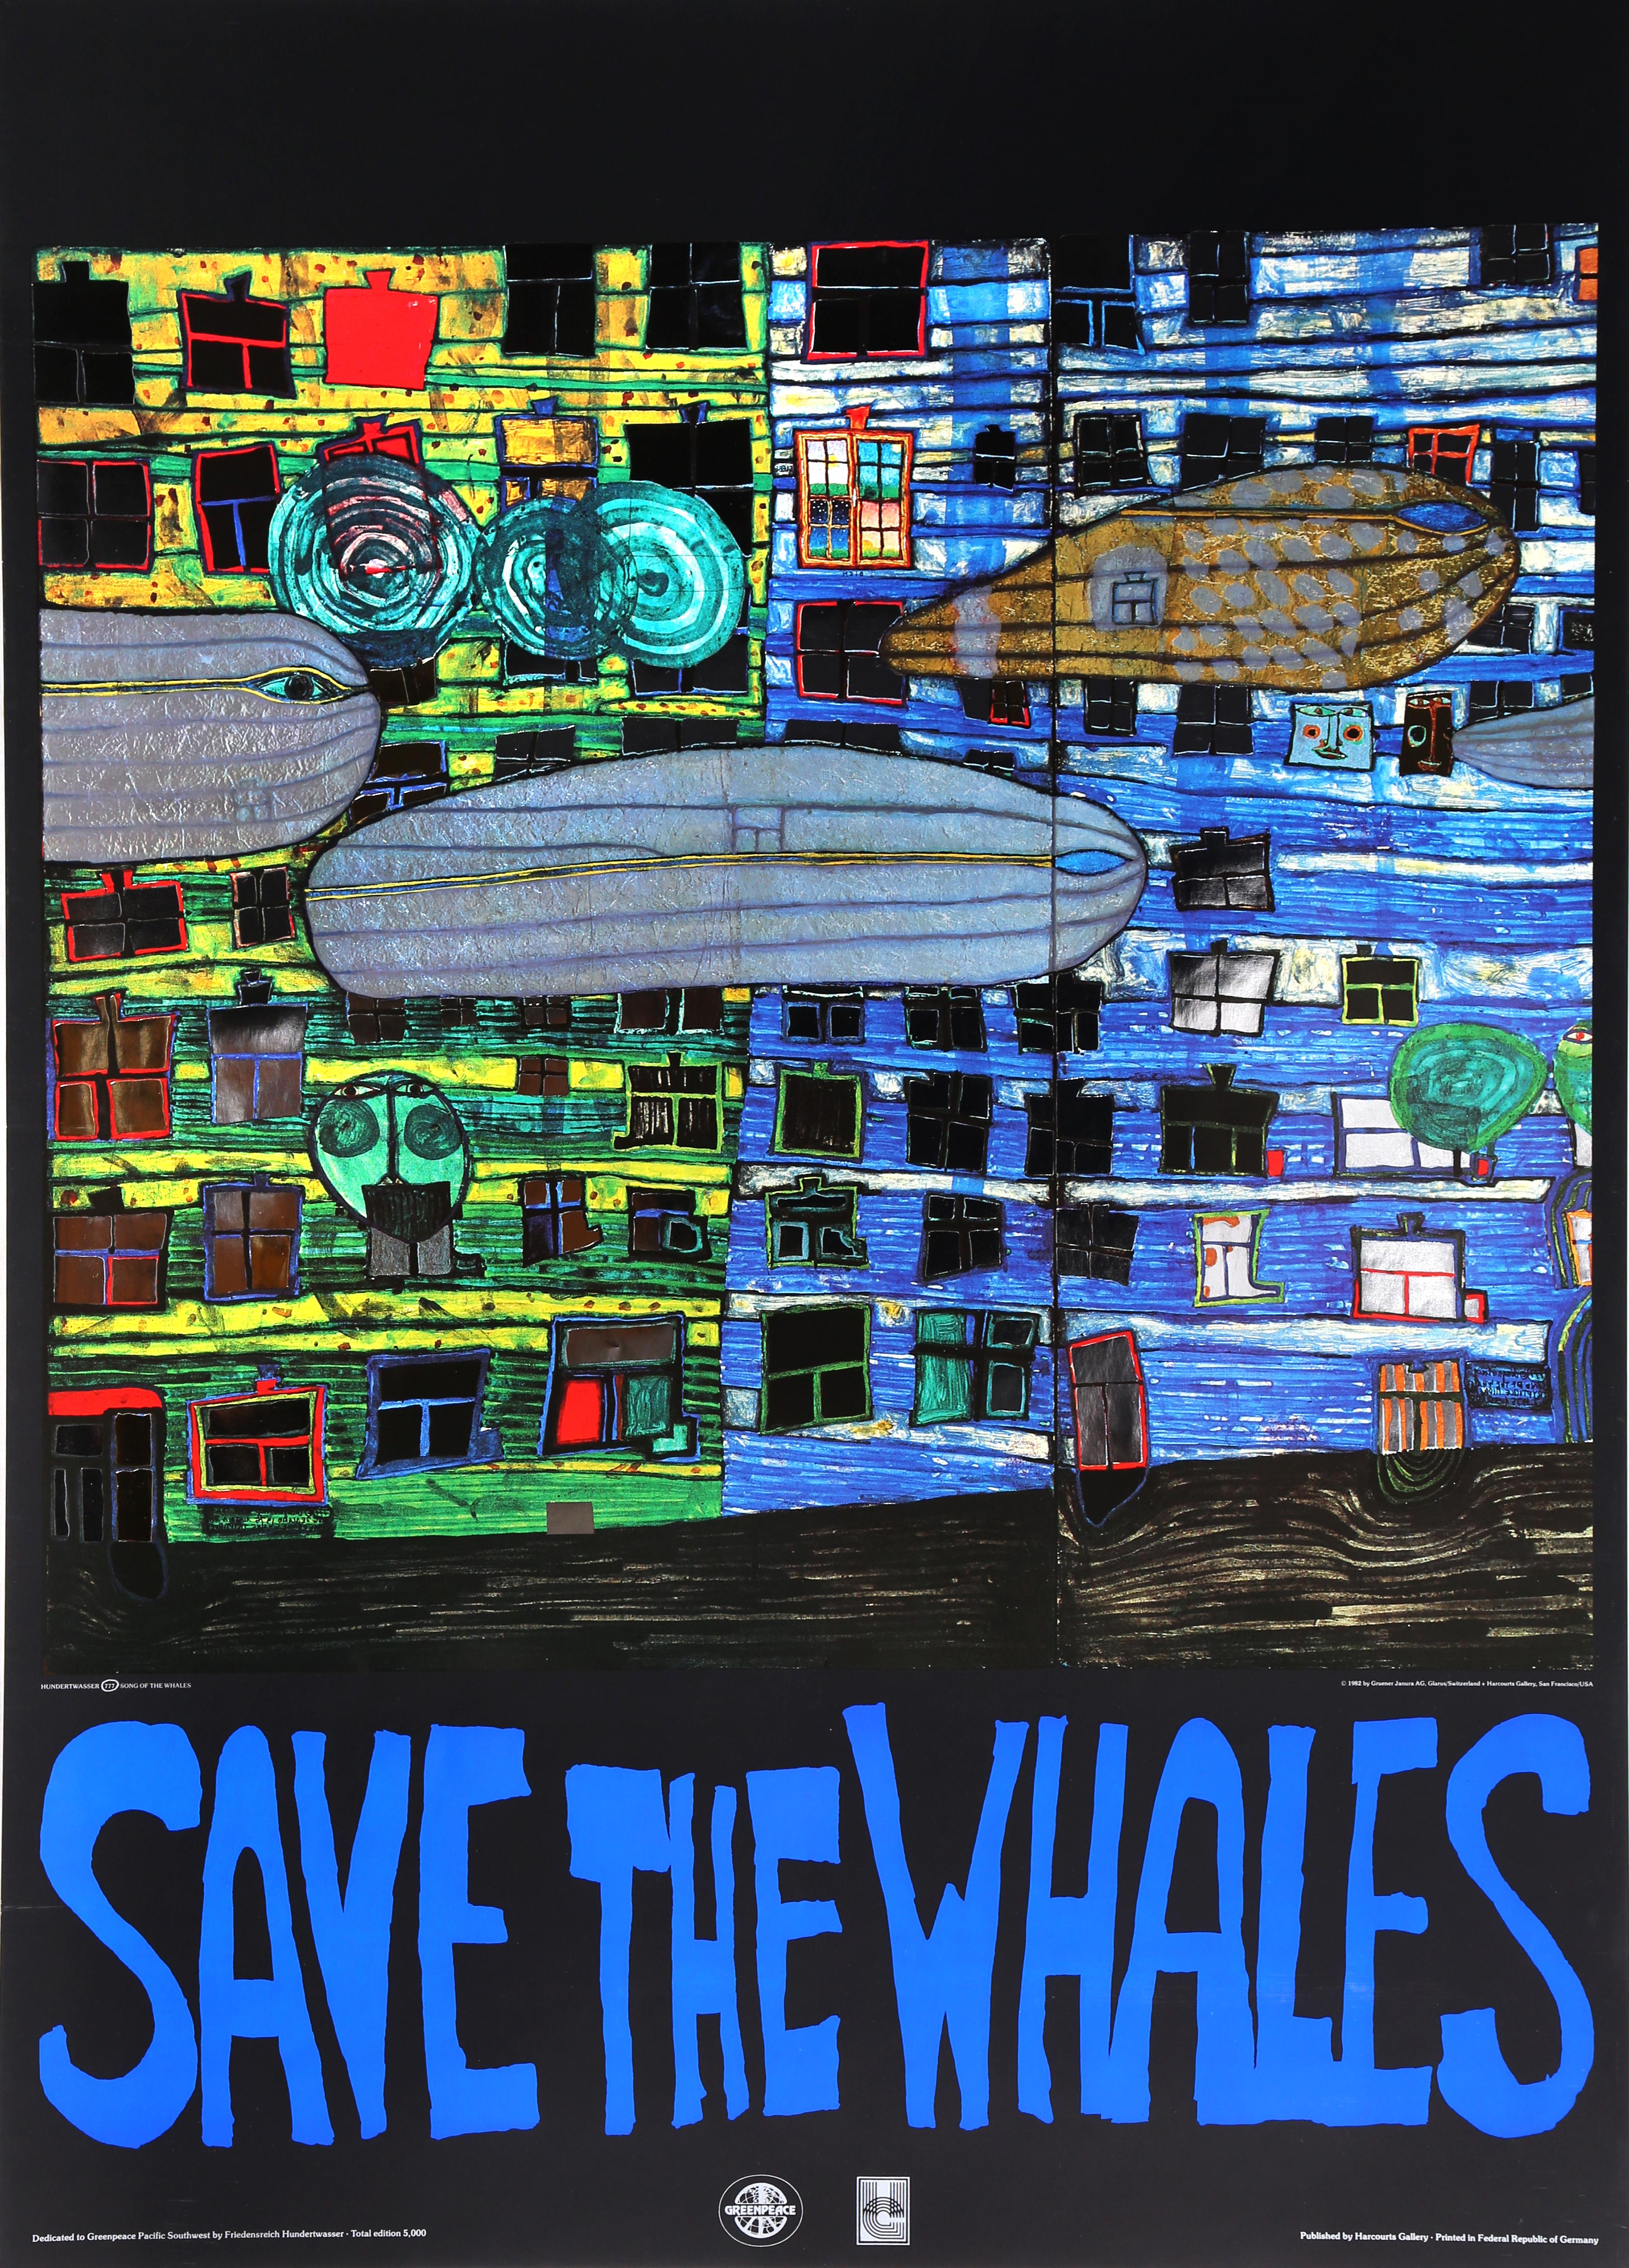 Save the Whales, Foil Embossed Poster, by Hundertwasser 1982